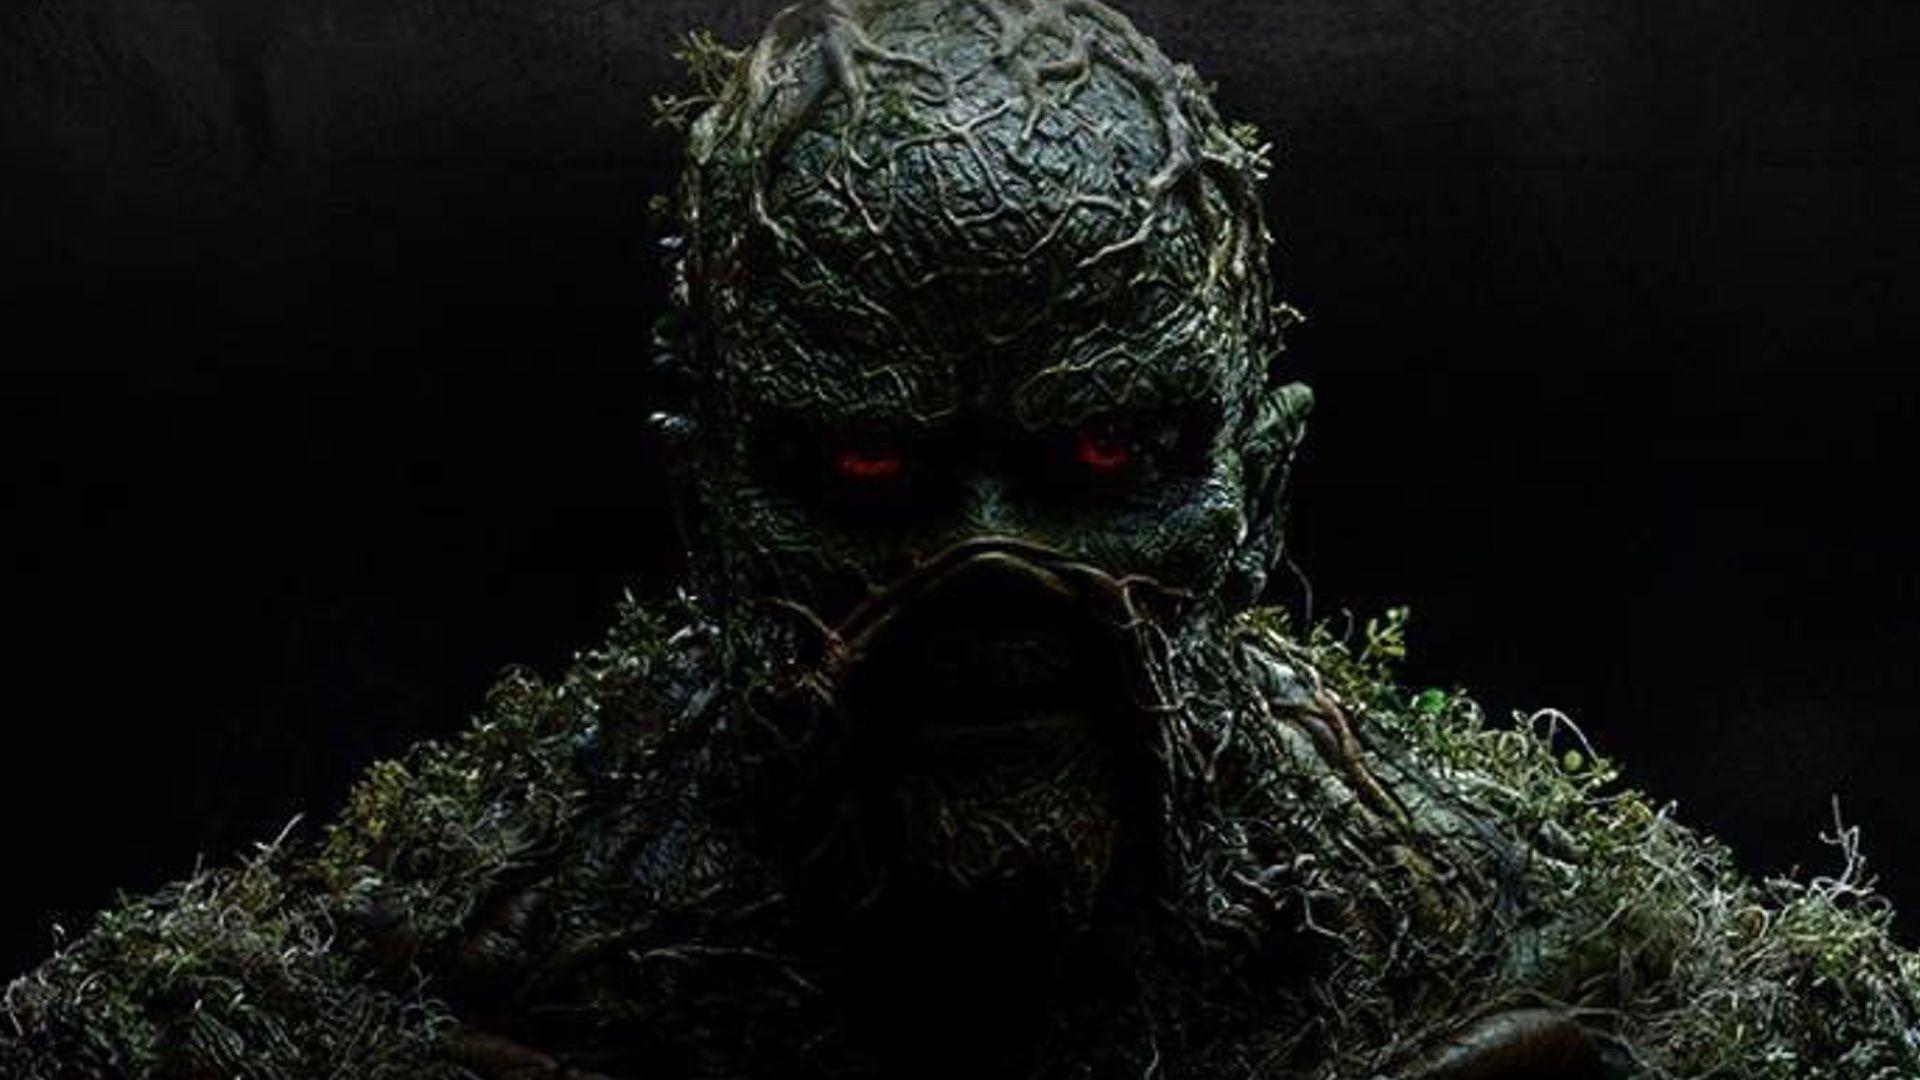 Swamp Thing returns from the water in first trailer for DC